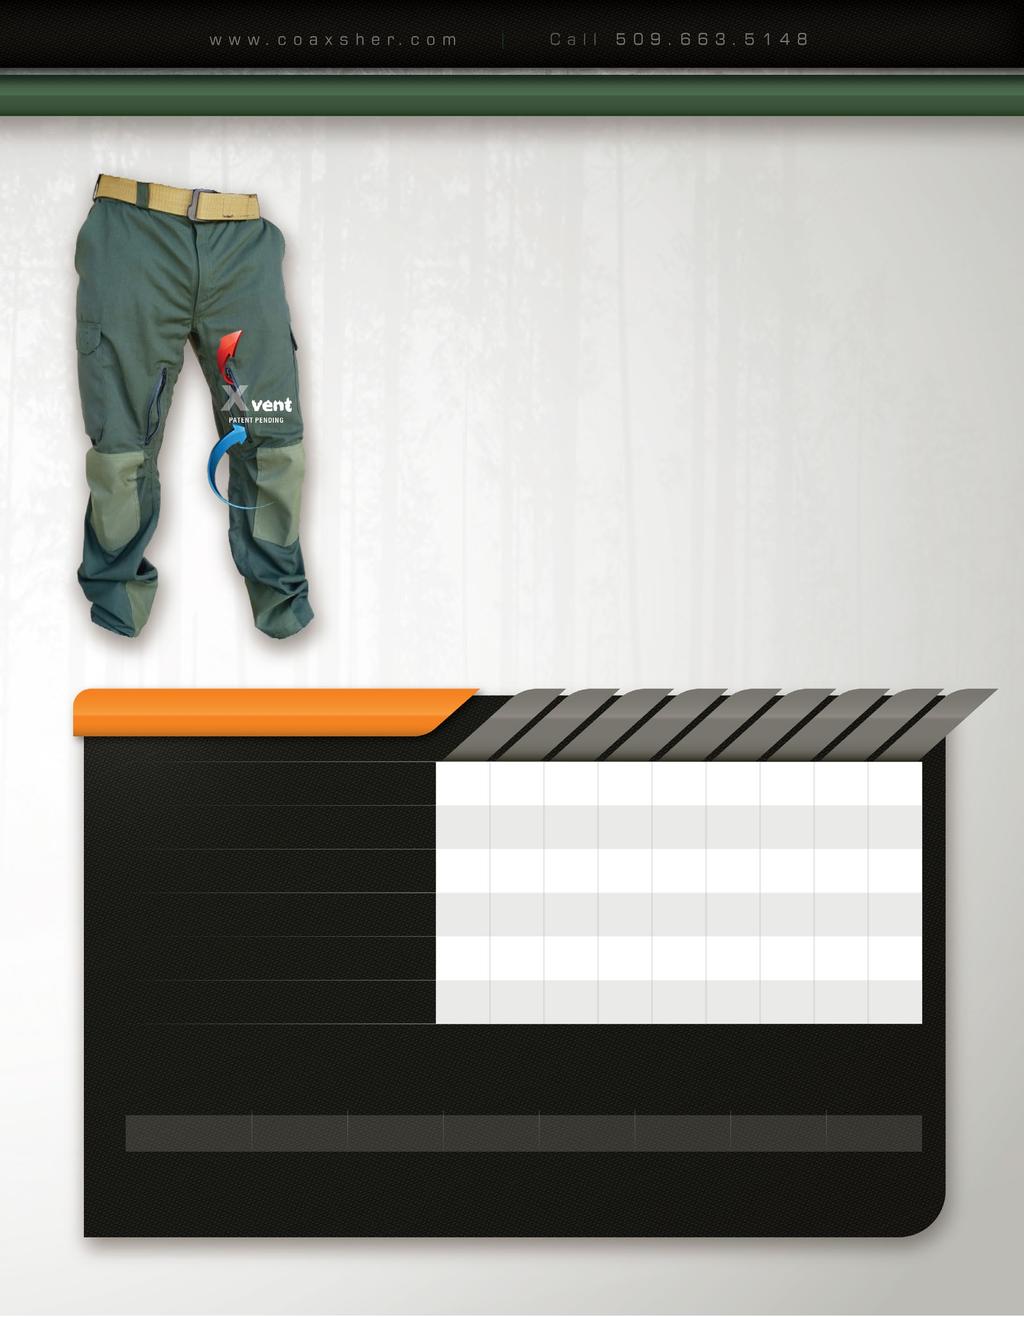 VECTOR WILDLAND Fire Pant Day or night the Vector Wildland Fire Pant craves the fire line. Tecasafe Plus 700 material provides maximum comfort, protection, and durability.